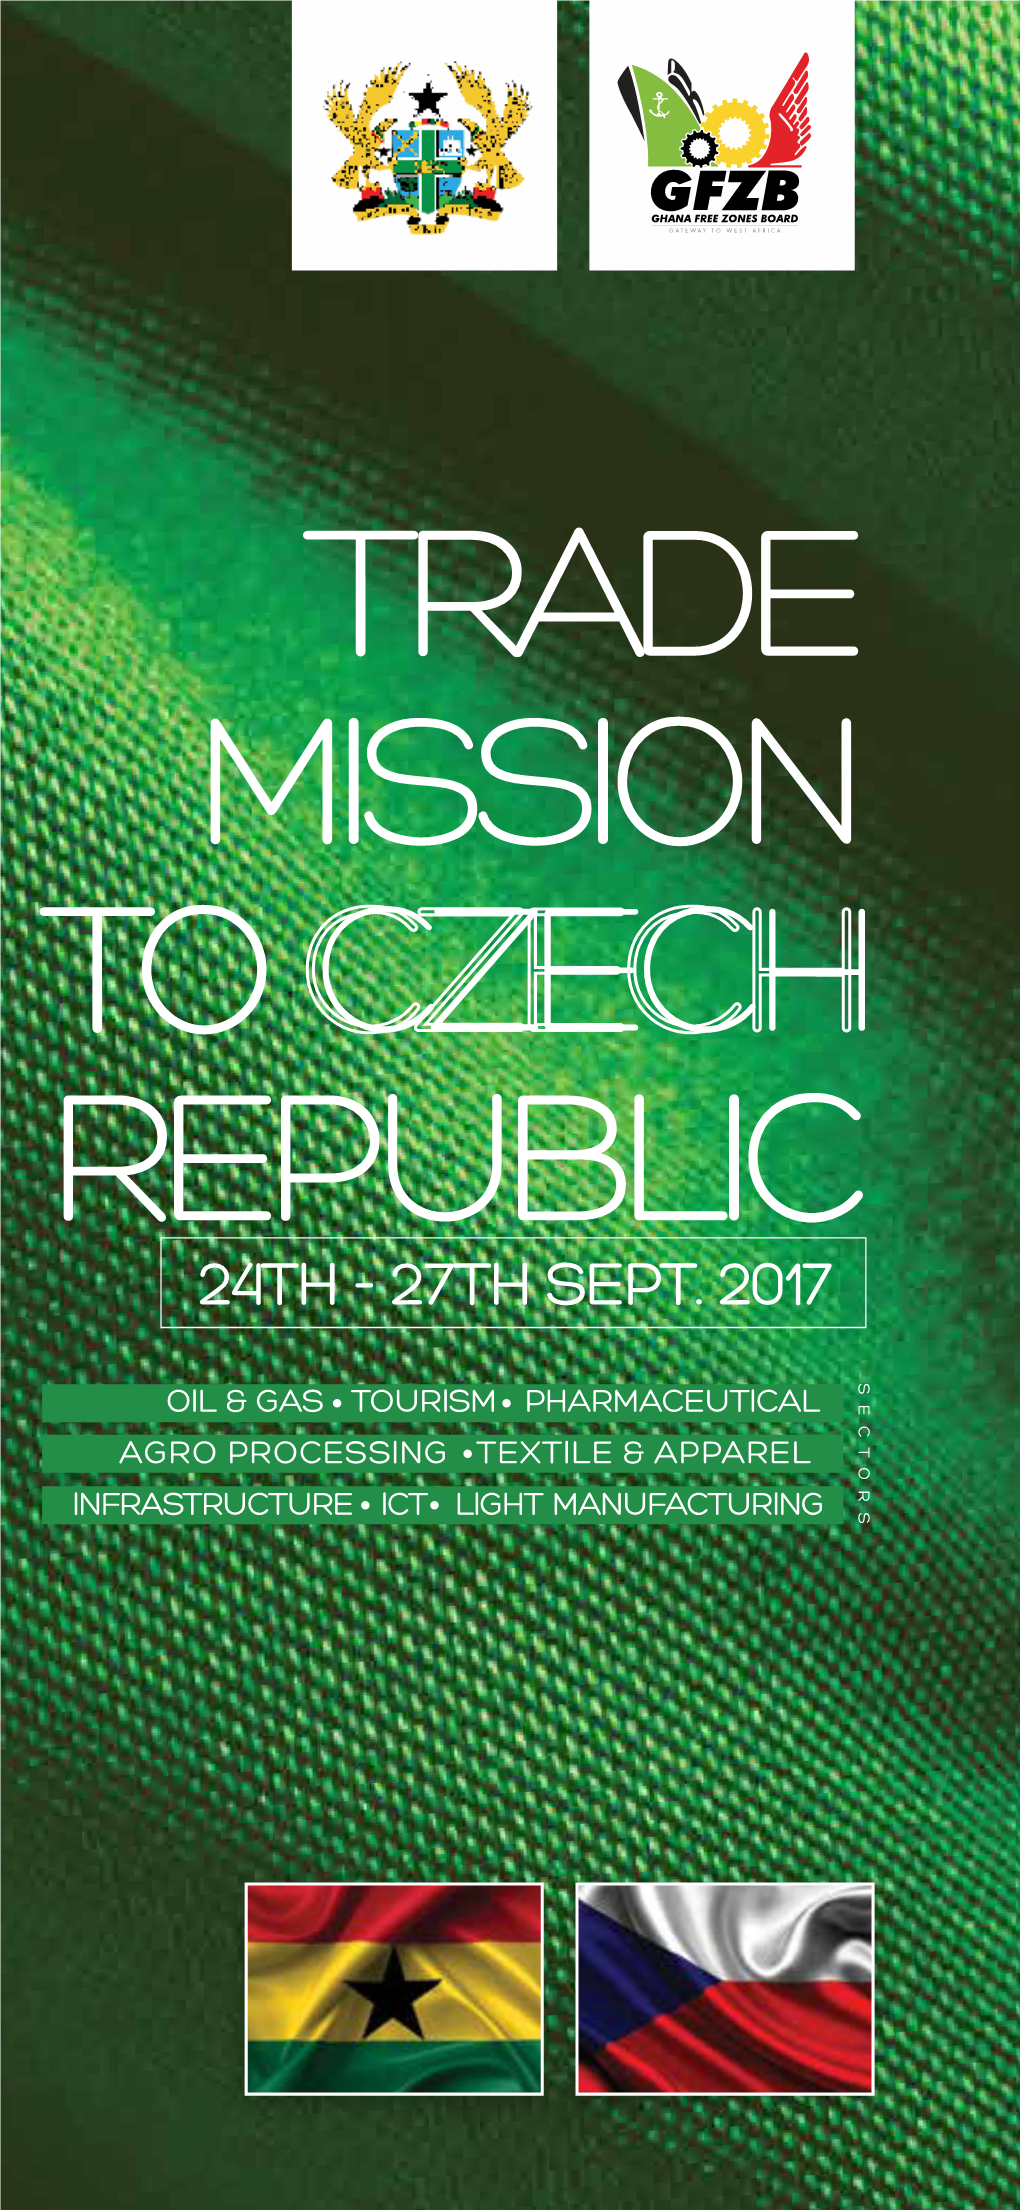 Trade Mission to Czech Republic Sectors Oil & Gas Tourism Pharmaceutical Agro Processing Textile & Apparel Infrastructure Ict Light Manufacturing